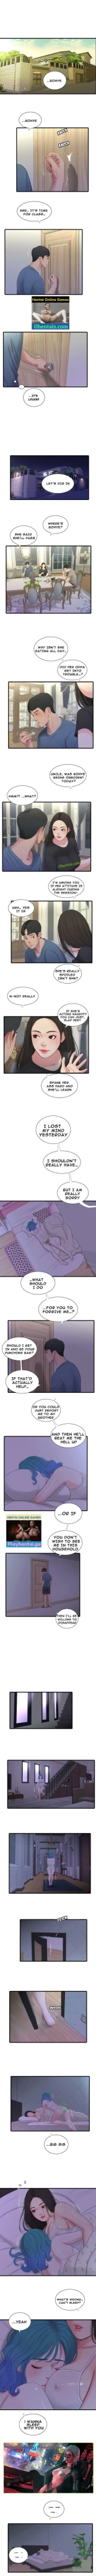 One's In-Laws Virgins Ch. 23-25 : page 9